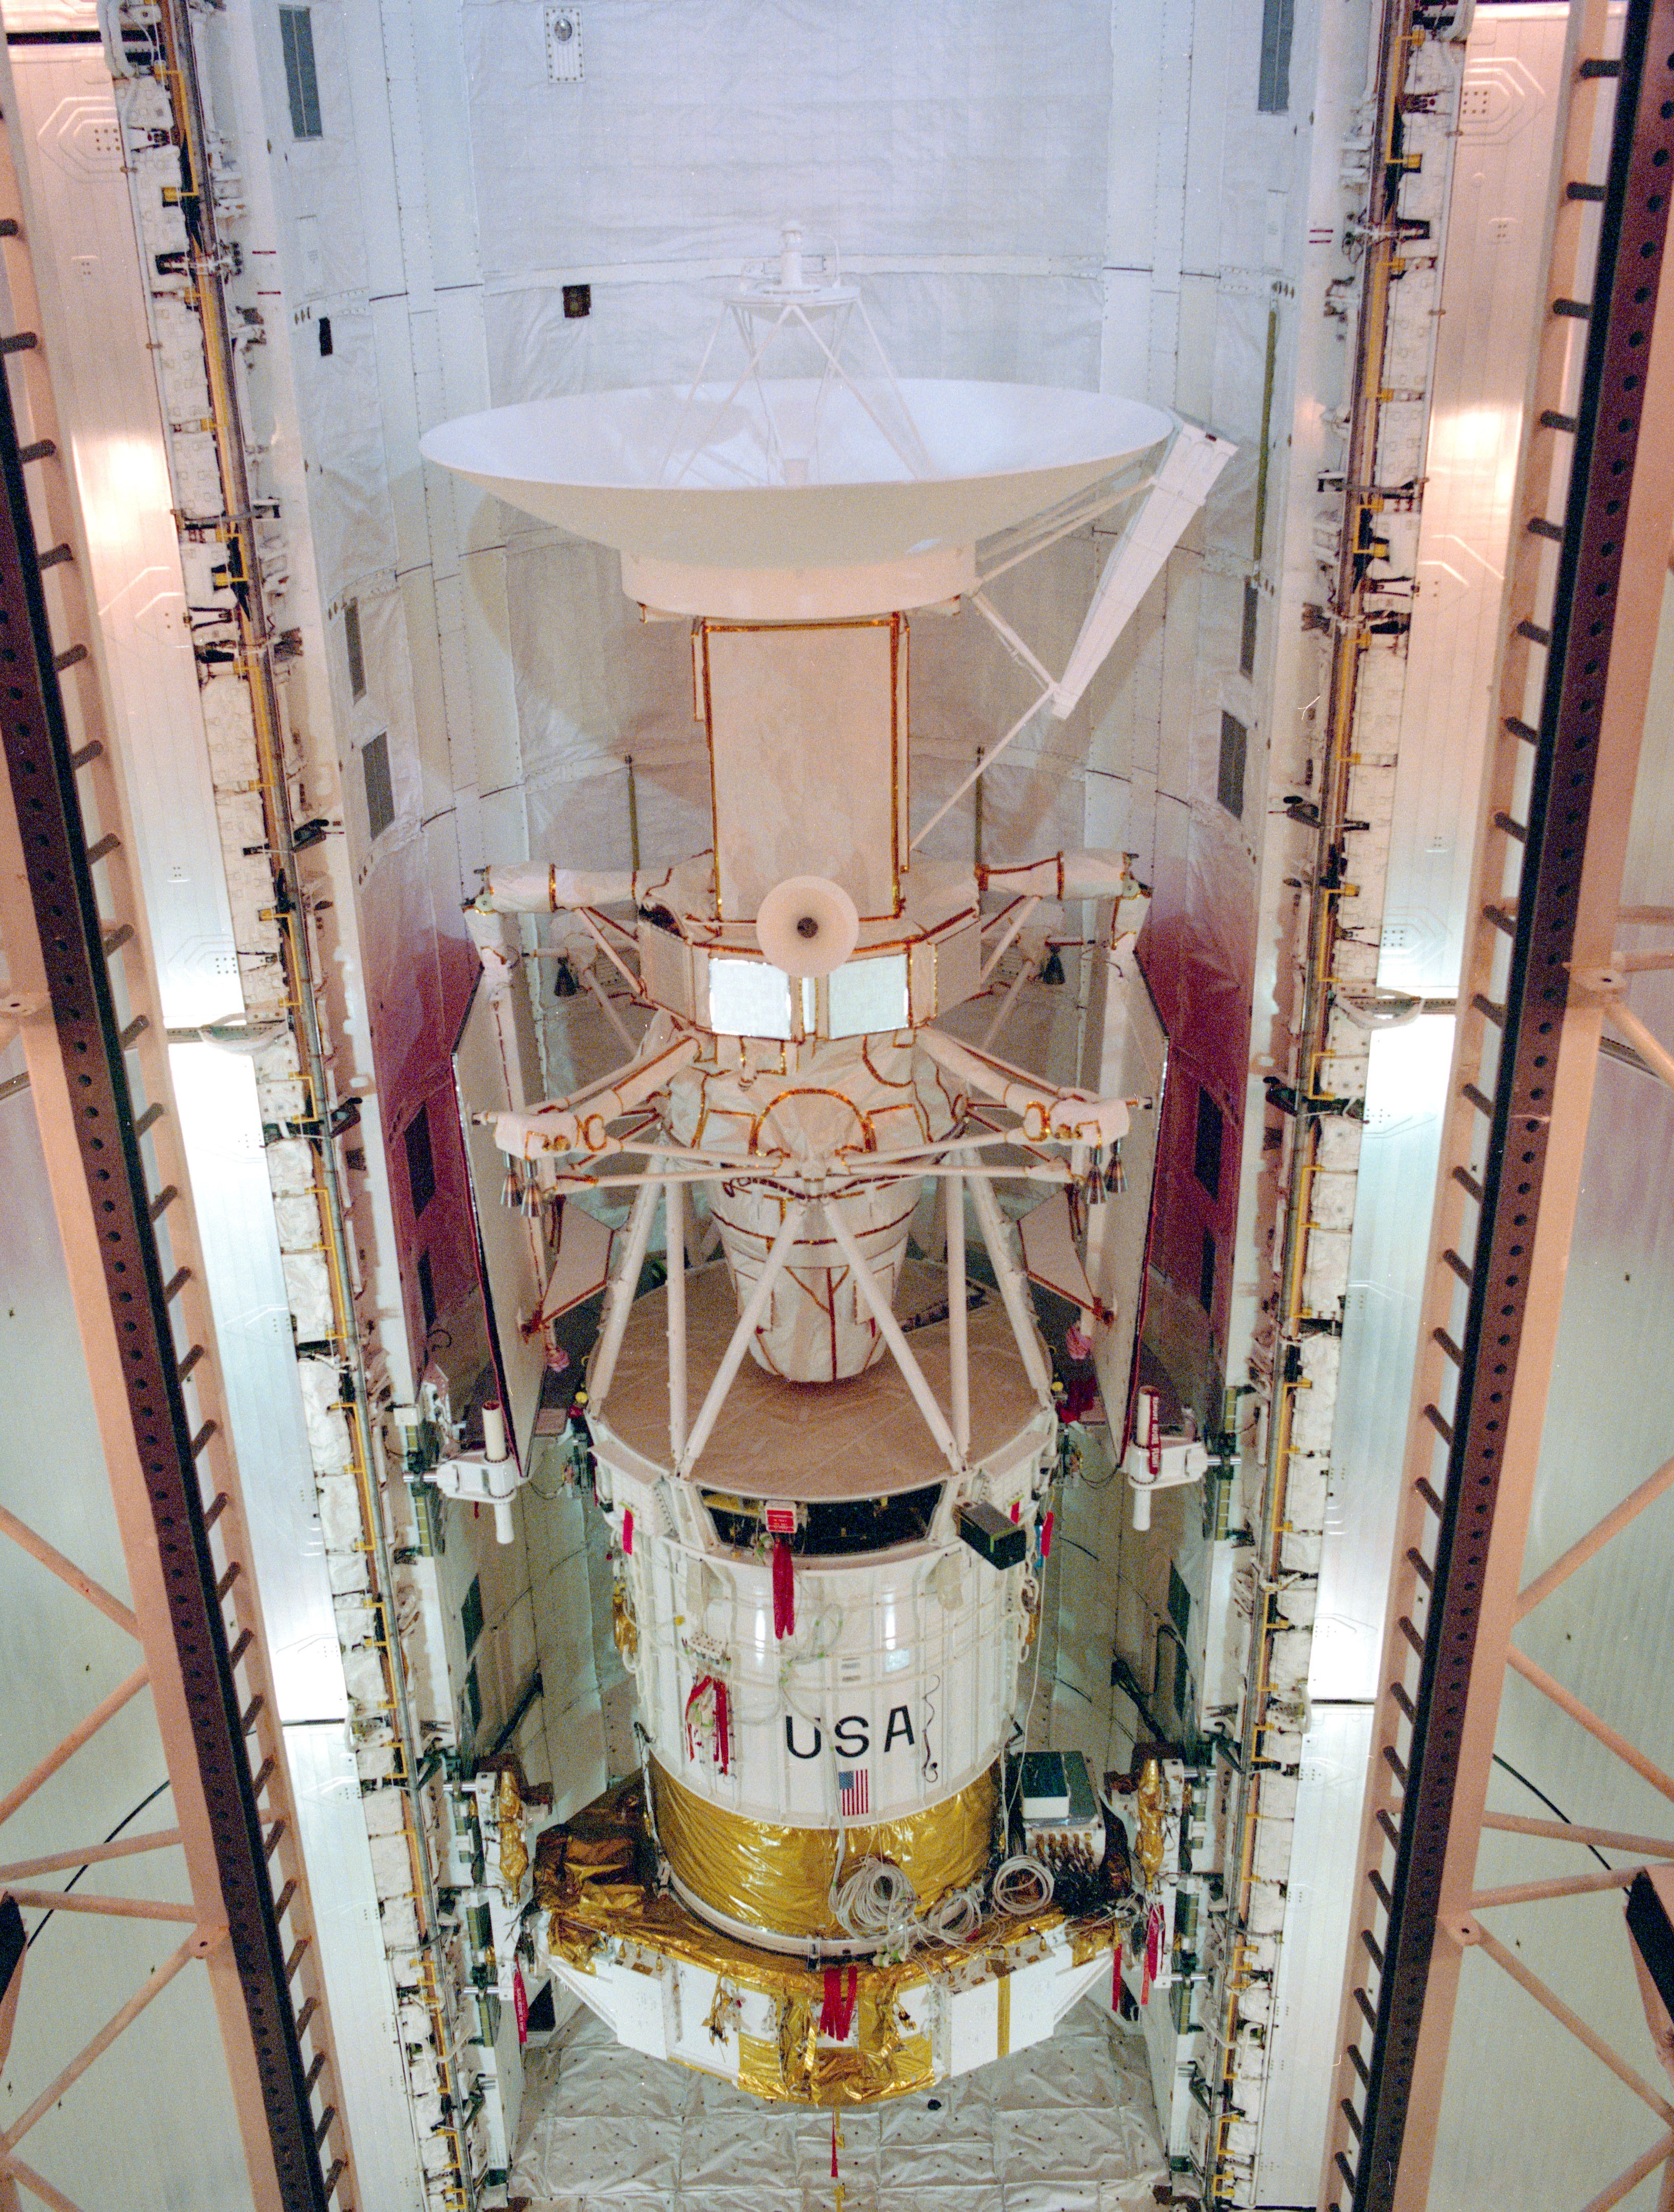 NASA Space Technology The Magellan spacecraft in Atlantis’ payload bay in preparation for STS-30